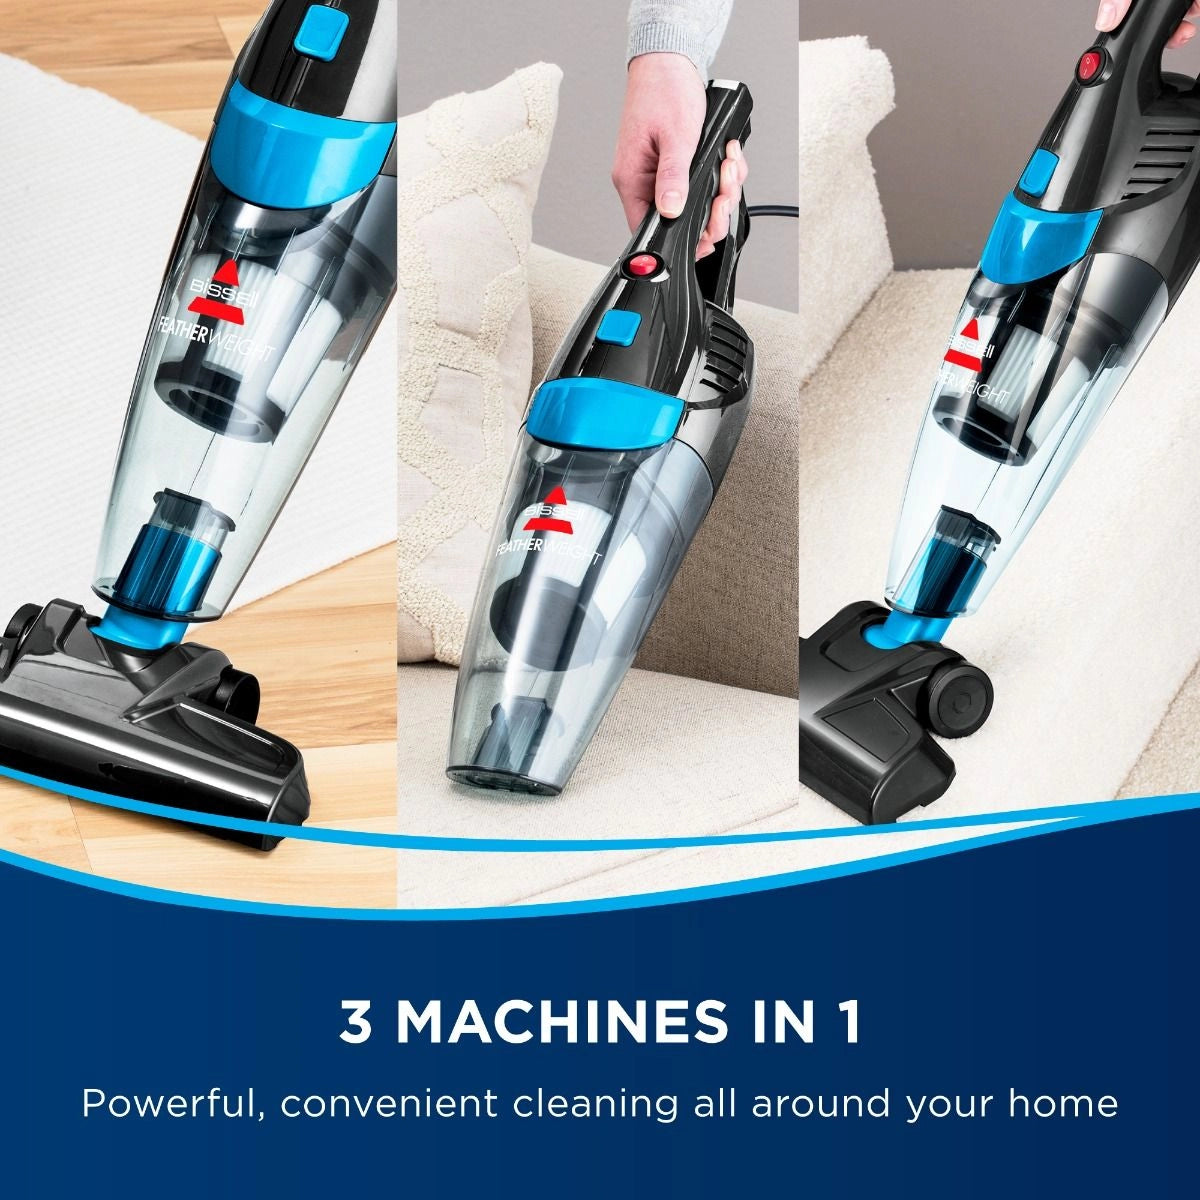 BISSELL Featherweight 2-in-1 520W